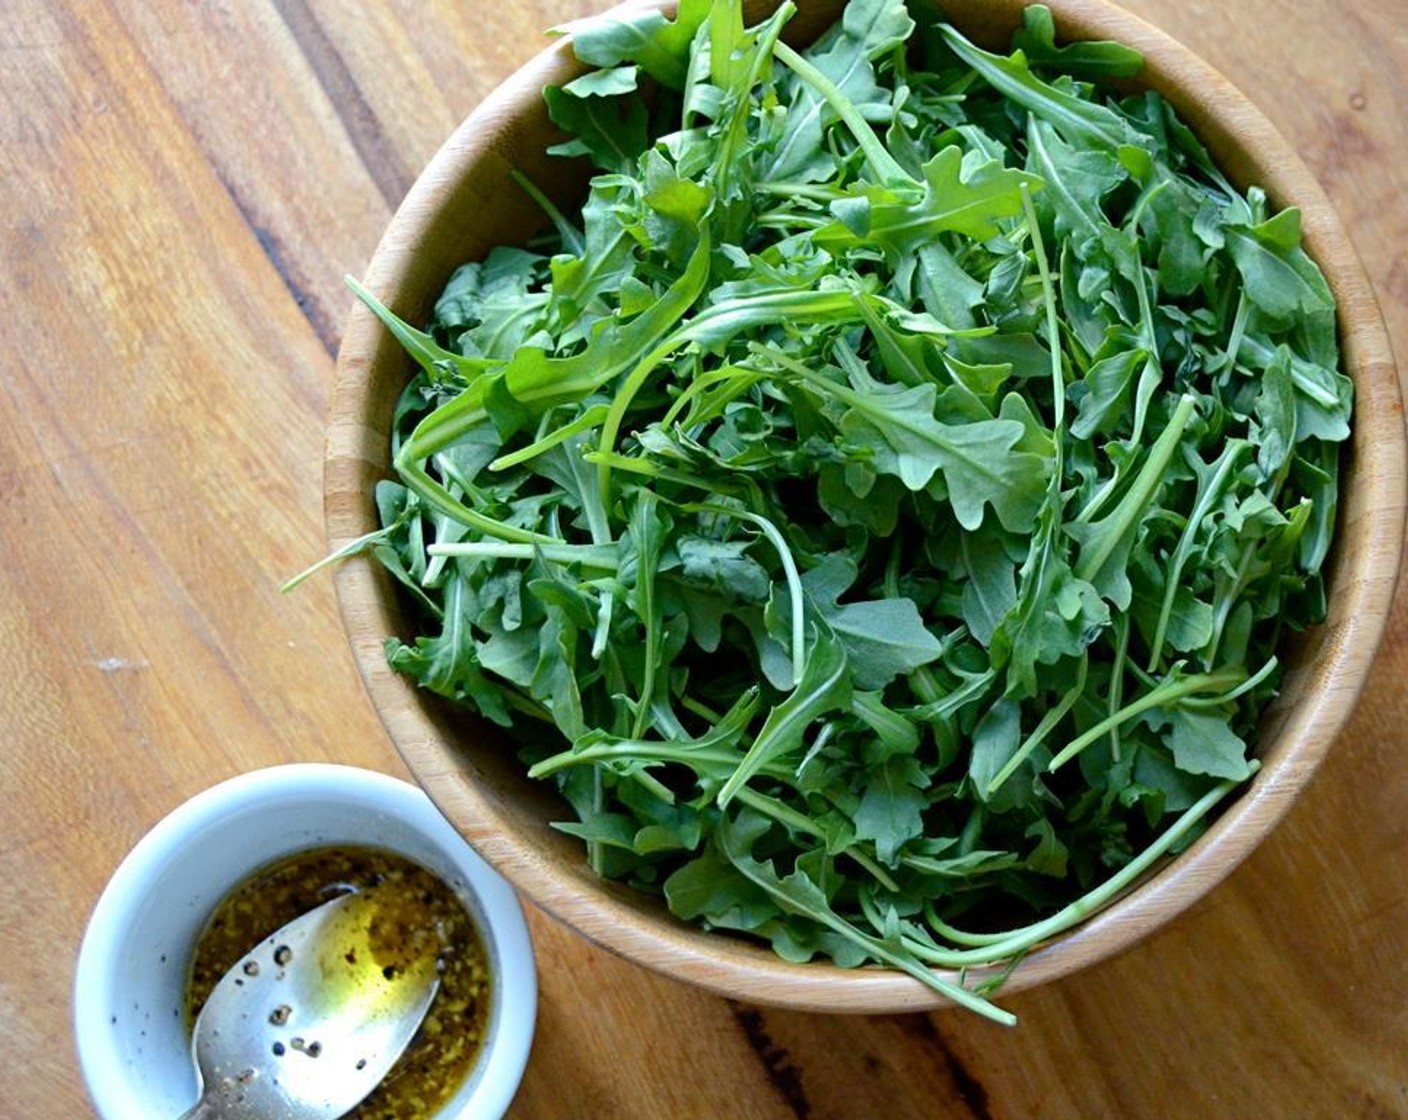 step 11 Place the Baby Arugula (14 cups) into a salad bowl and set aside. In a small bowl combine the Extra-Virgin Olive Oil (3 Tbsp) Red Wine Vinegar (1 Tbsp), Dijon Mustard (1 tsp), minced Garlic (1 clove), Sea Salt (1/2 tsp) and Freshly Ground Black Pepper (1/4 tsp).